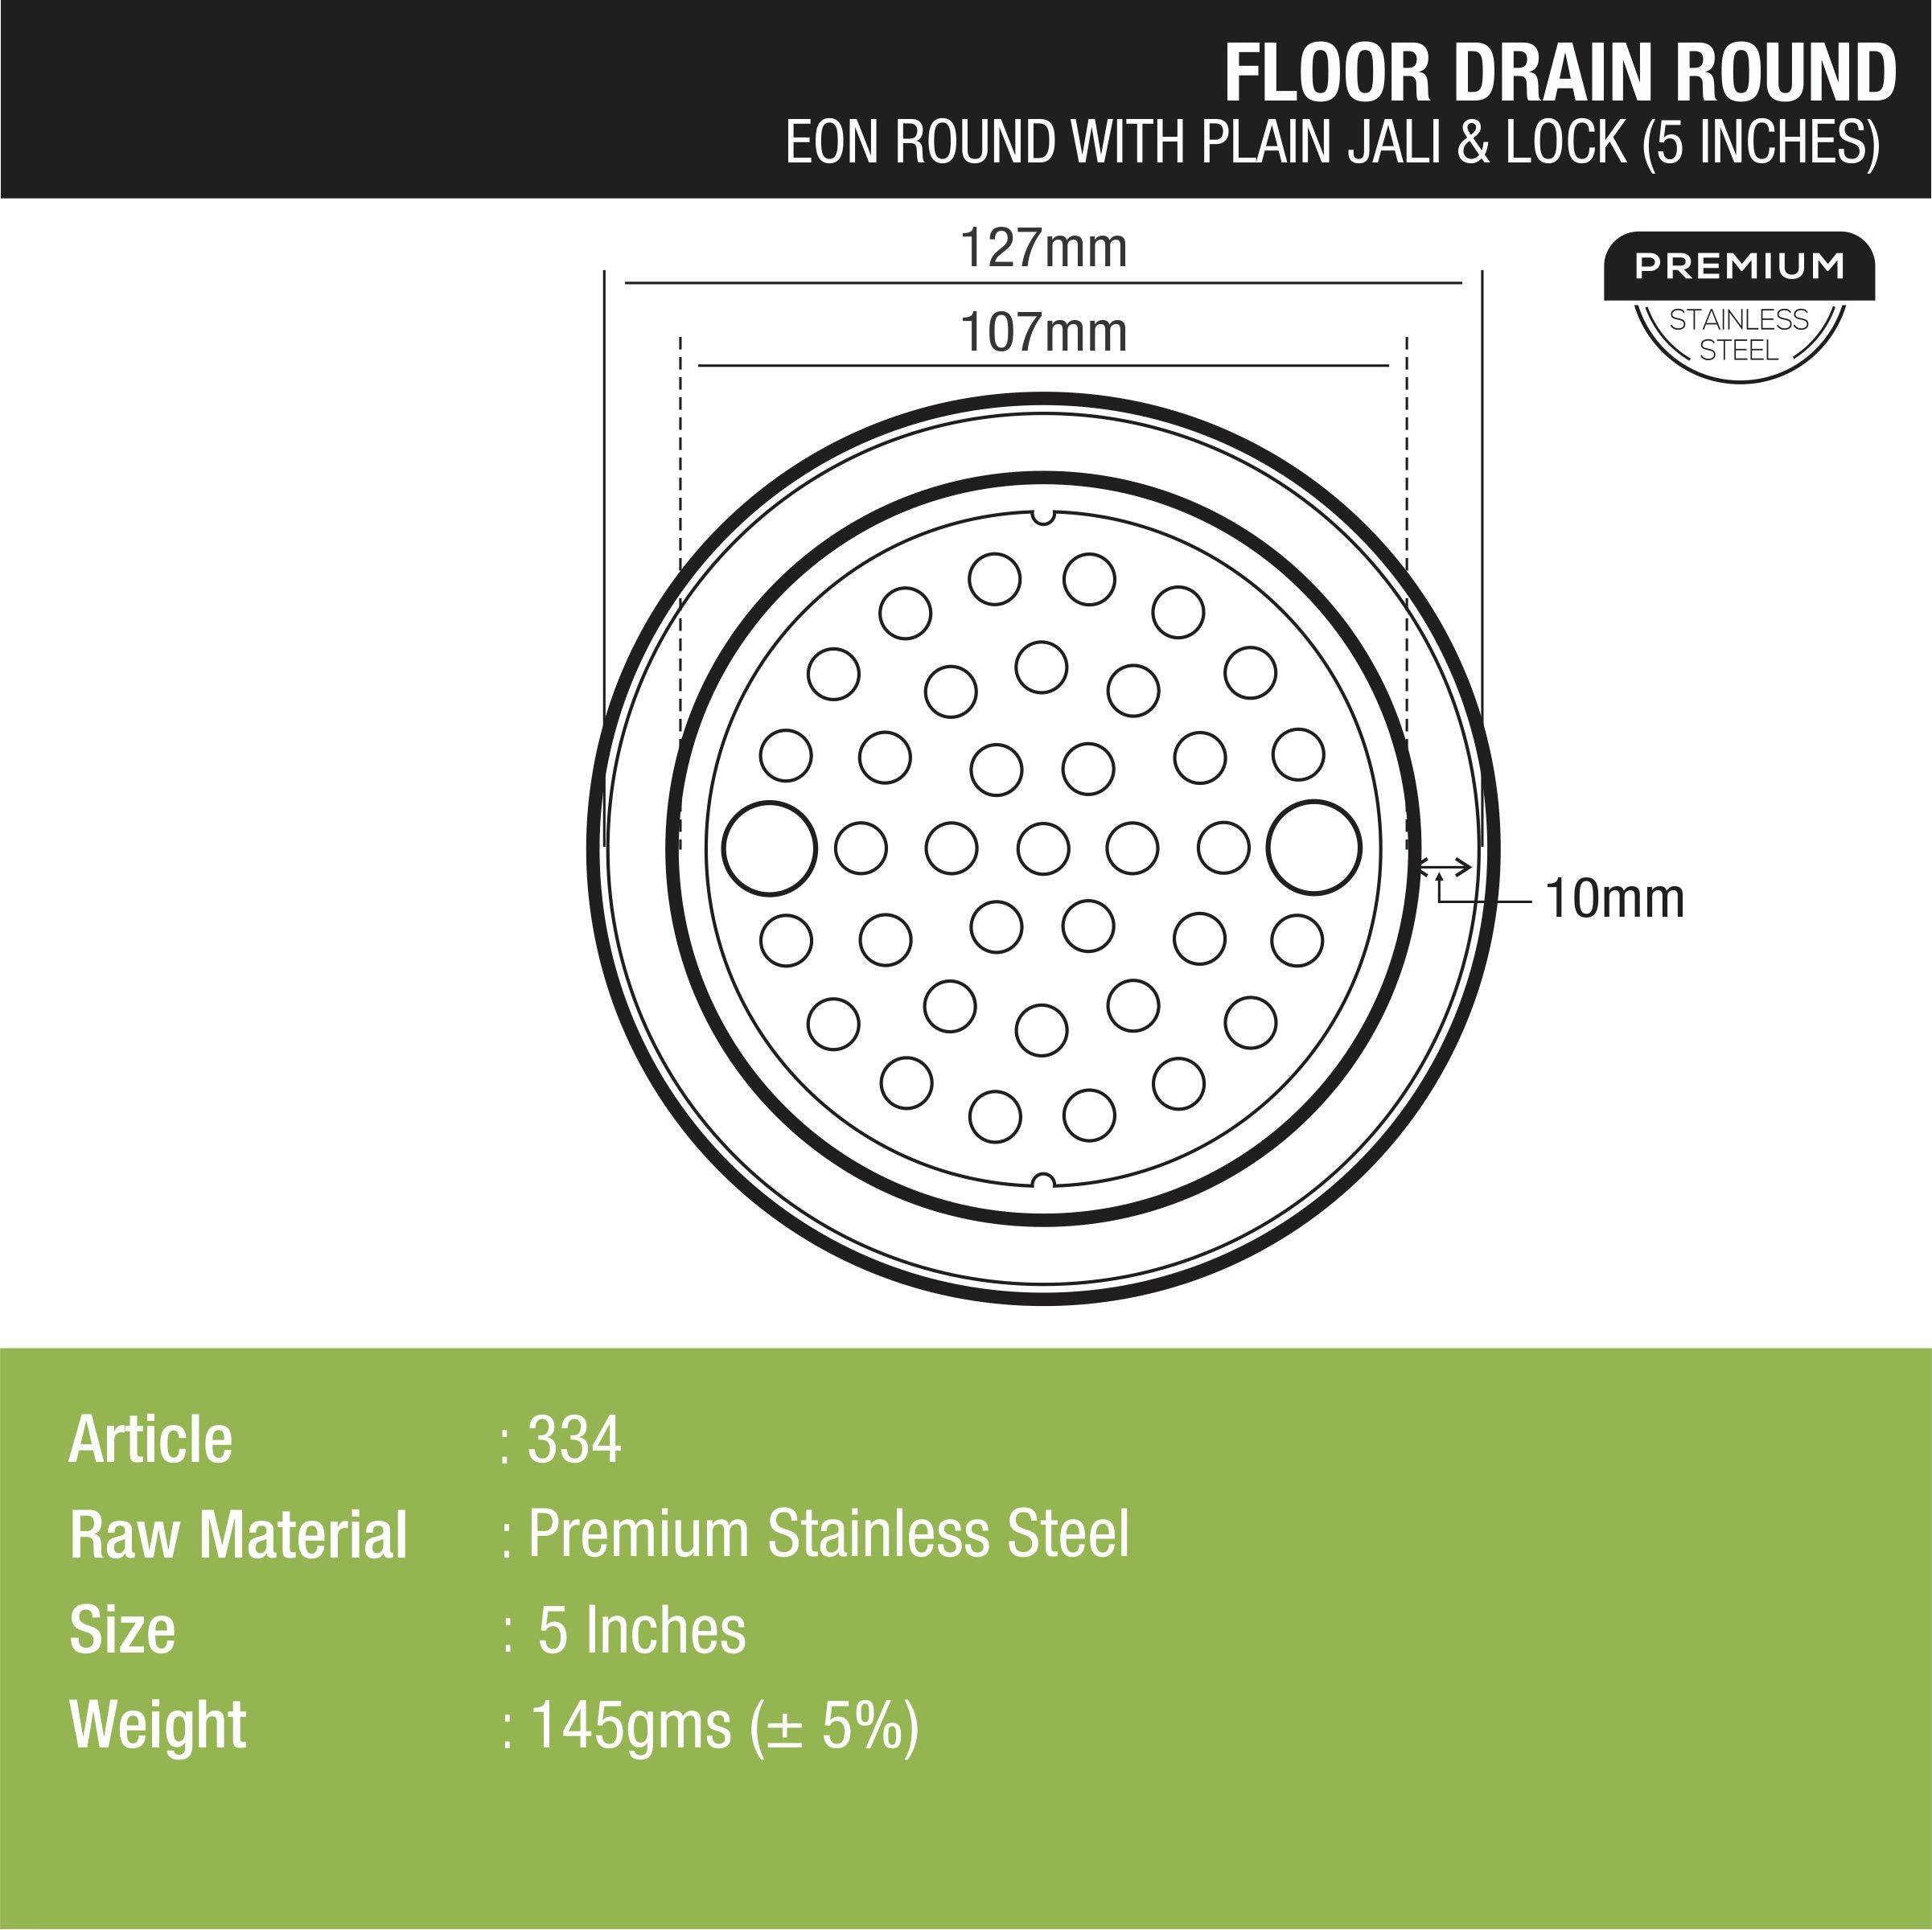 Eon Round Floor Drain with Plain Jali & Lock (5 inches) dimensions and sizes